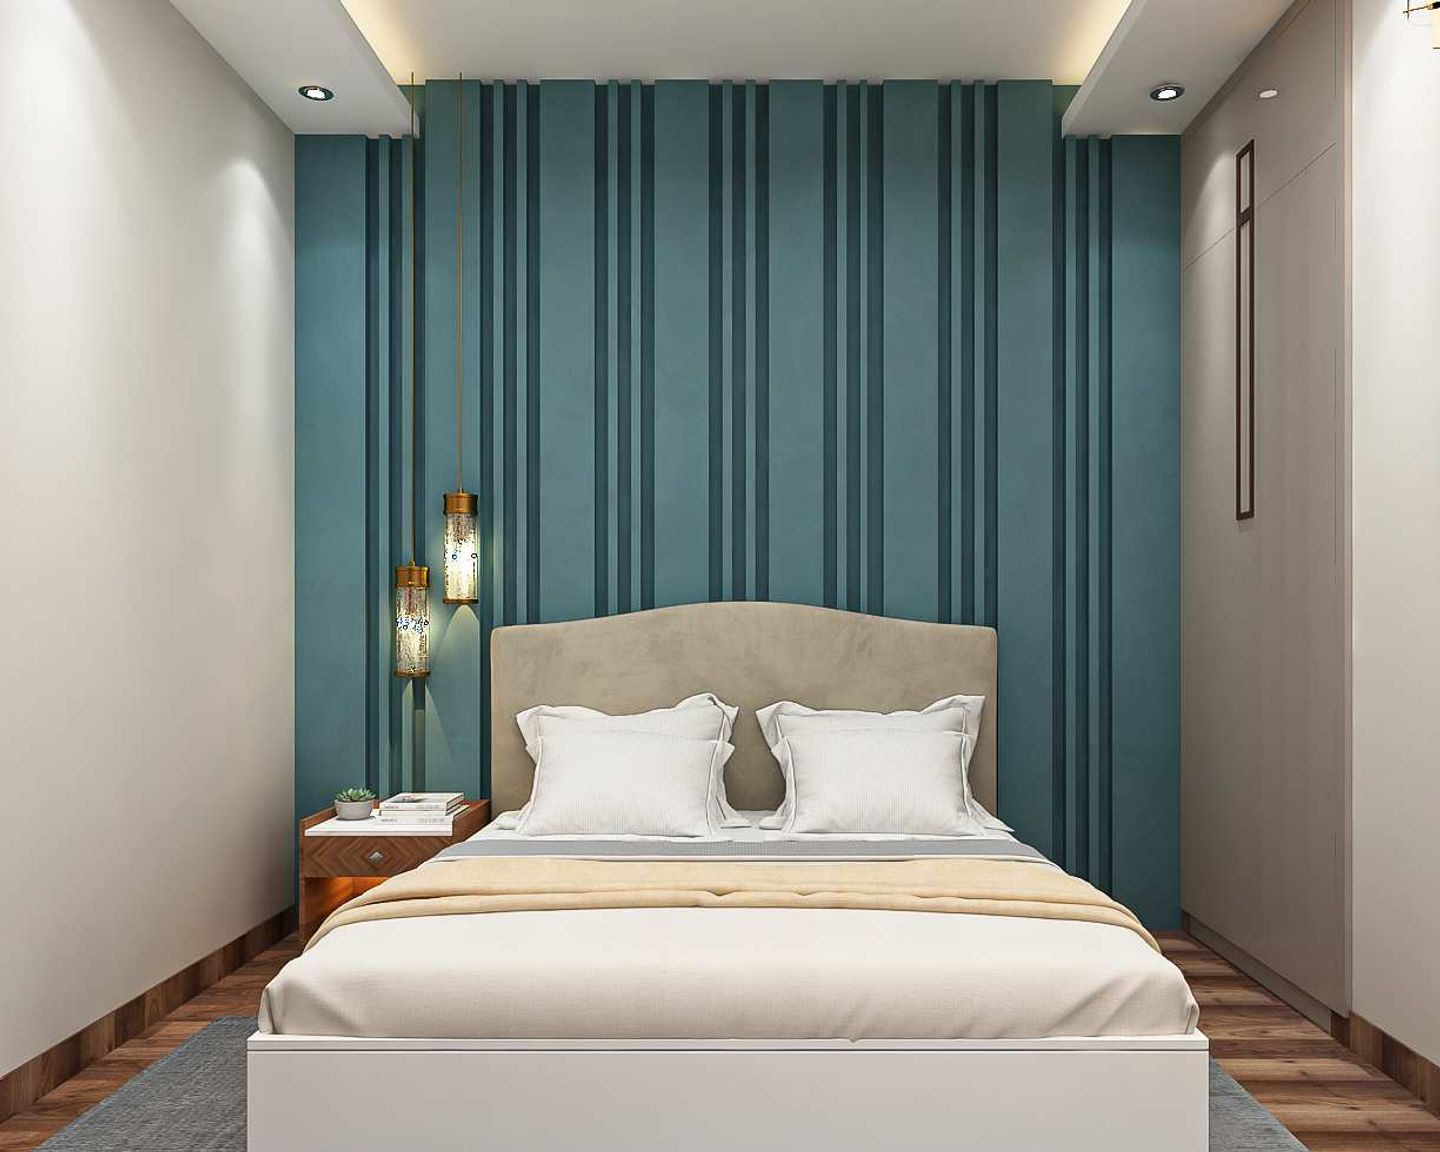 Modern Bedroom Wall Design With Blue Panelled Wall